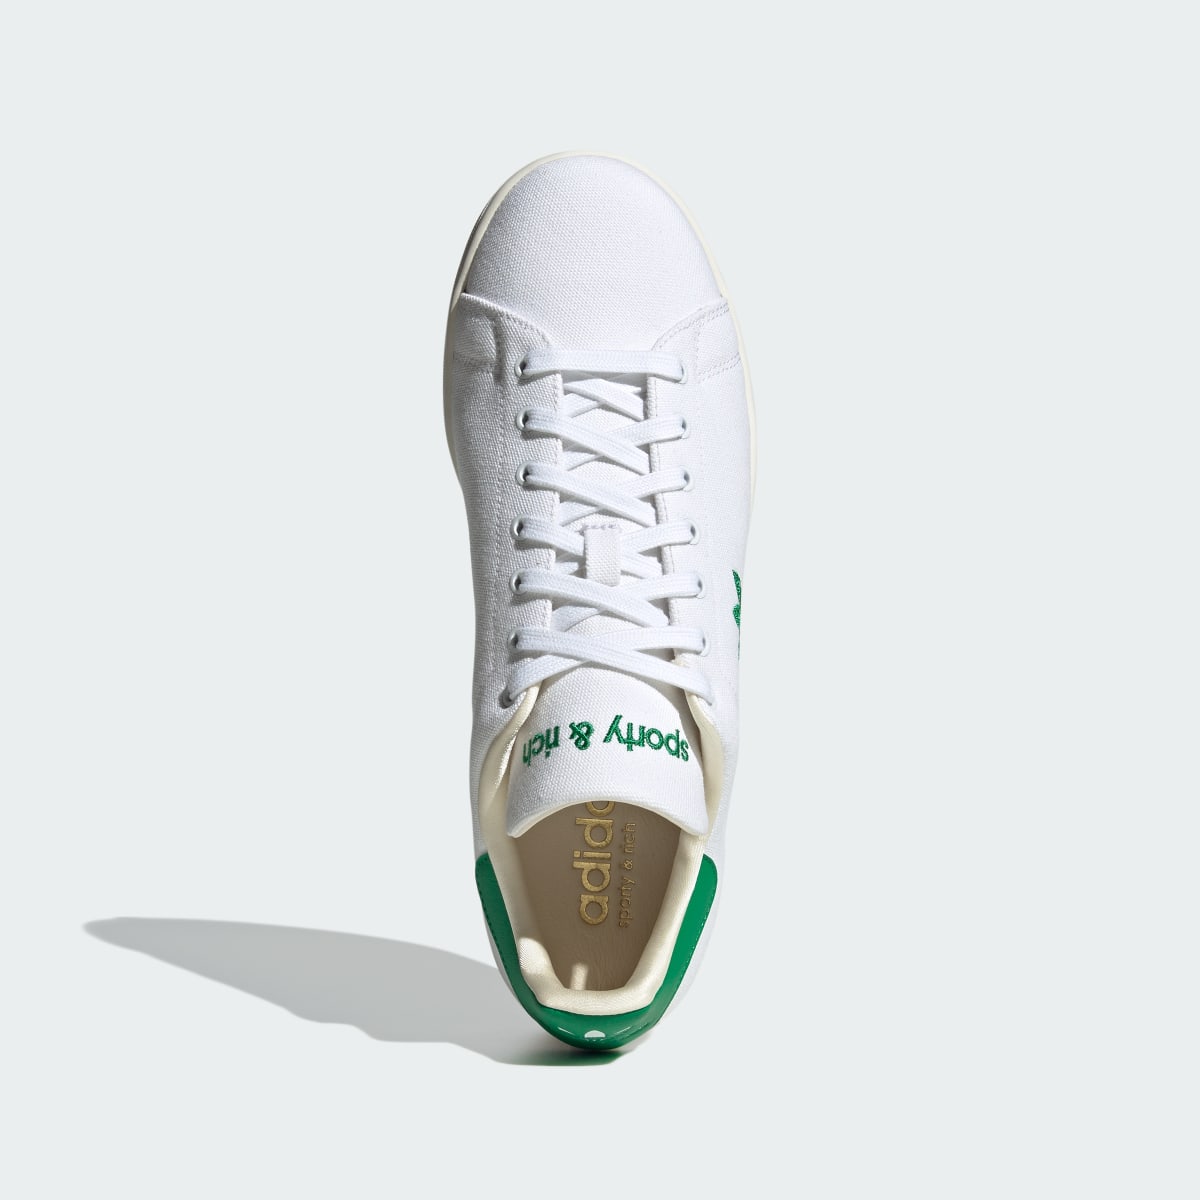 Adidas Stan Smith Sporty & Rich Shoes. 4